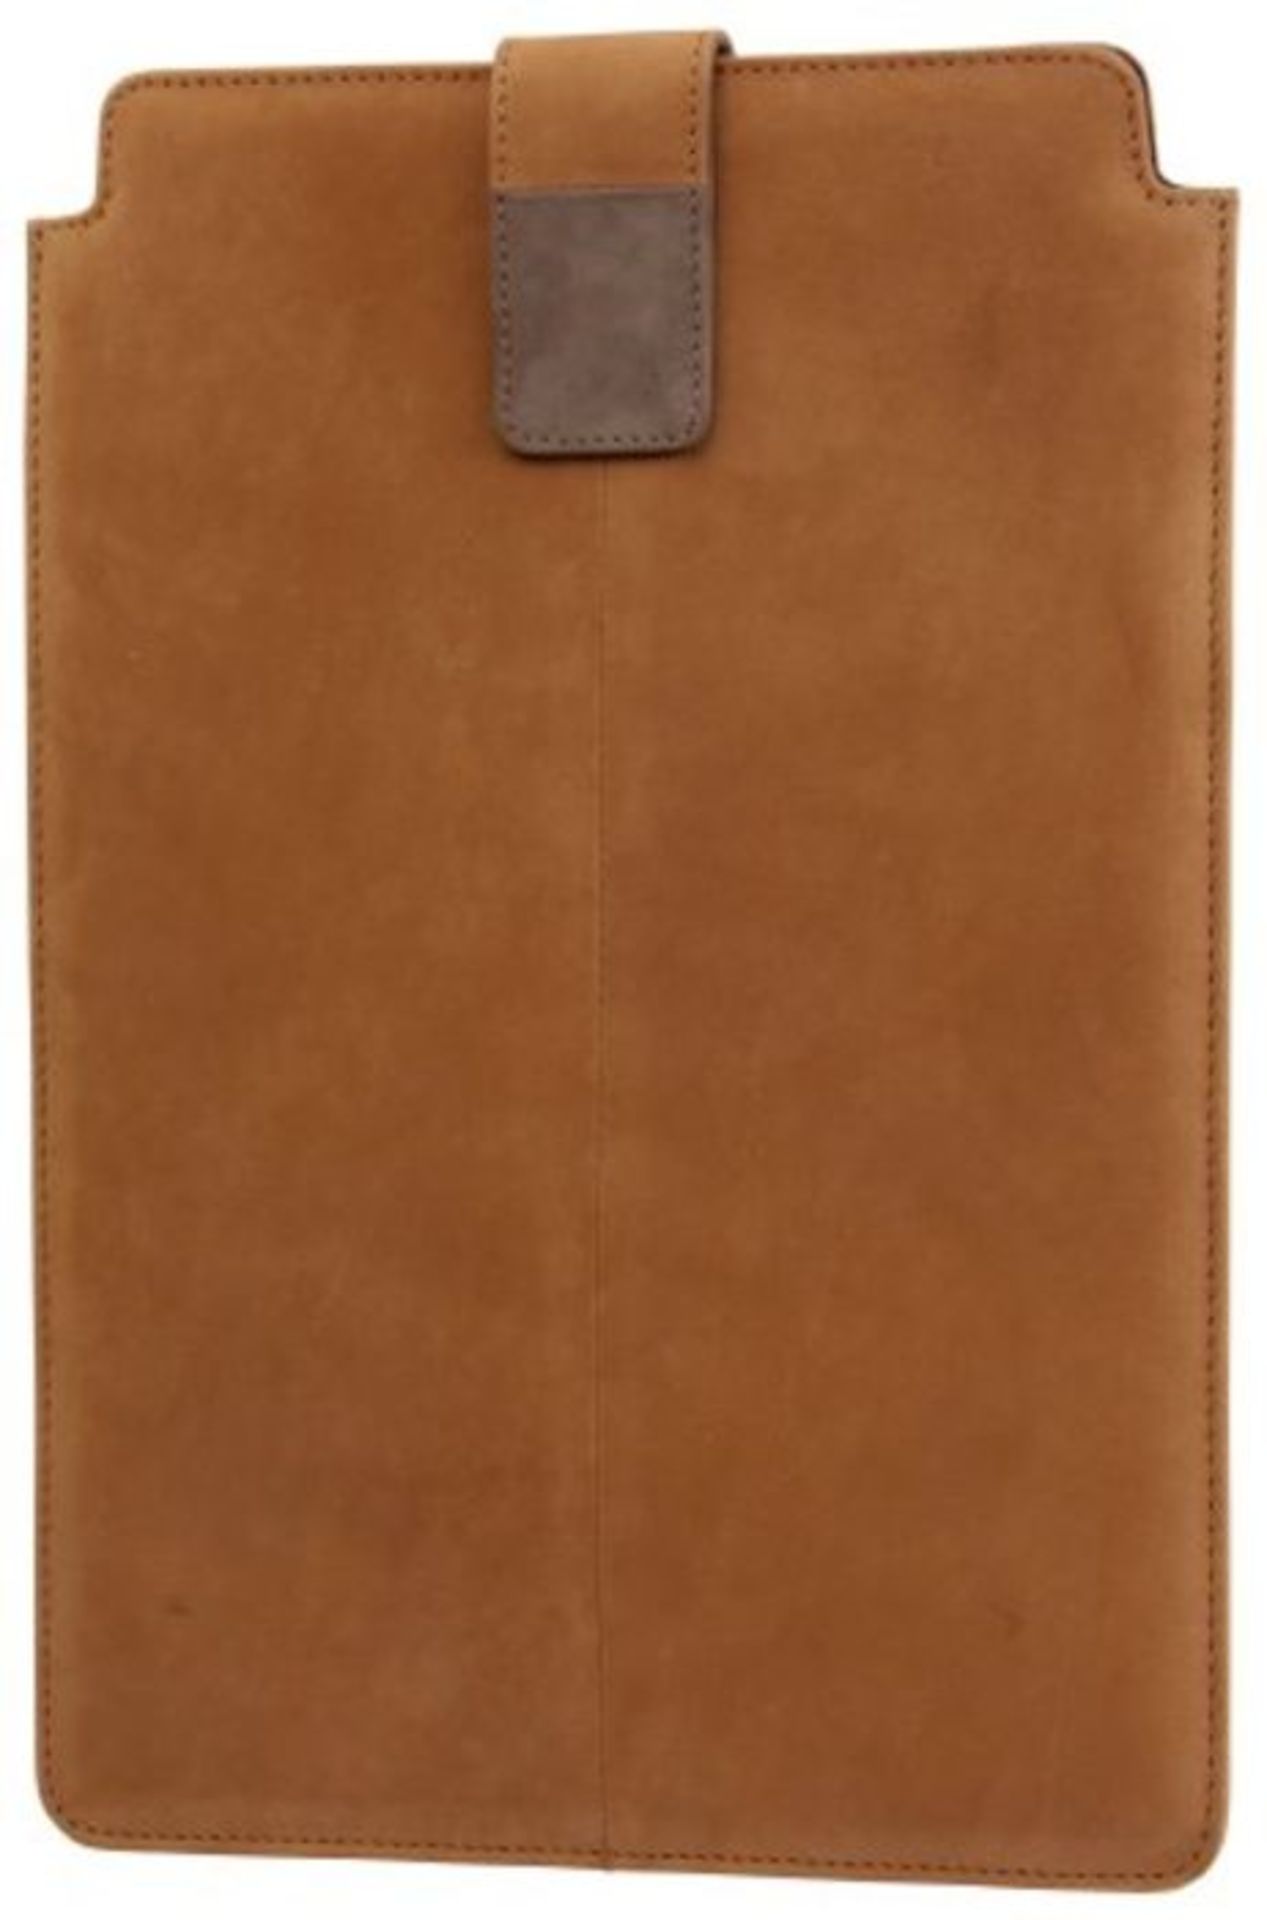 dbramante1928 Leather 'easy out' Slip Cover for 13 inch MacBook Air - Hunter Natural